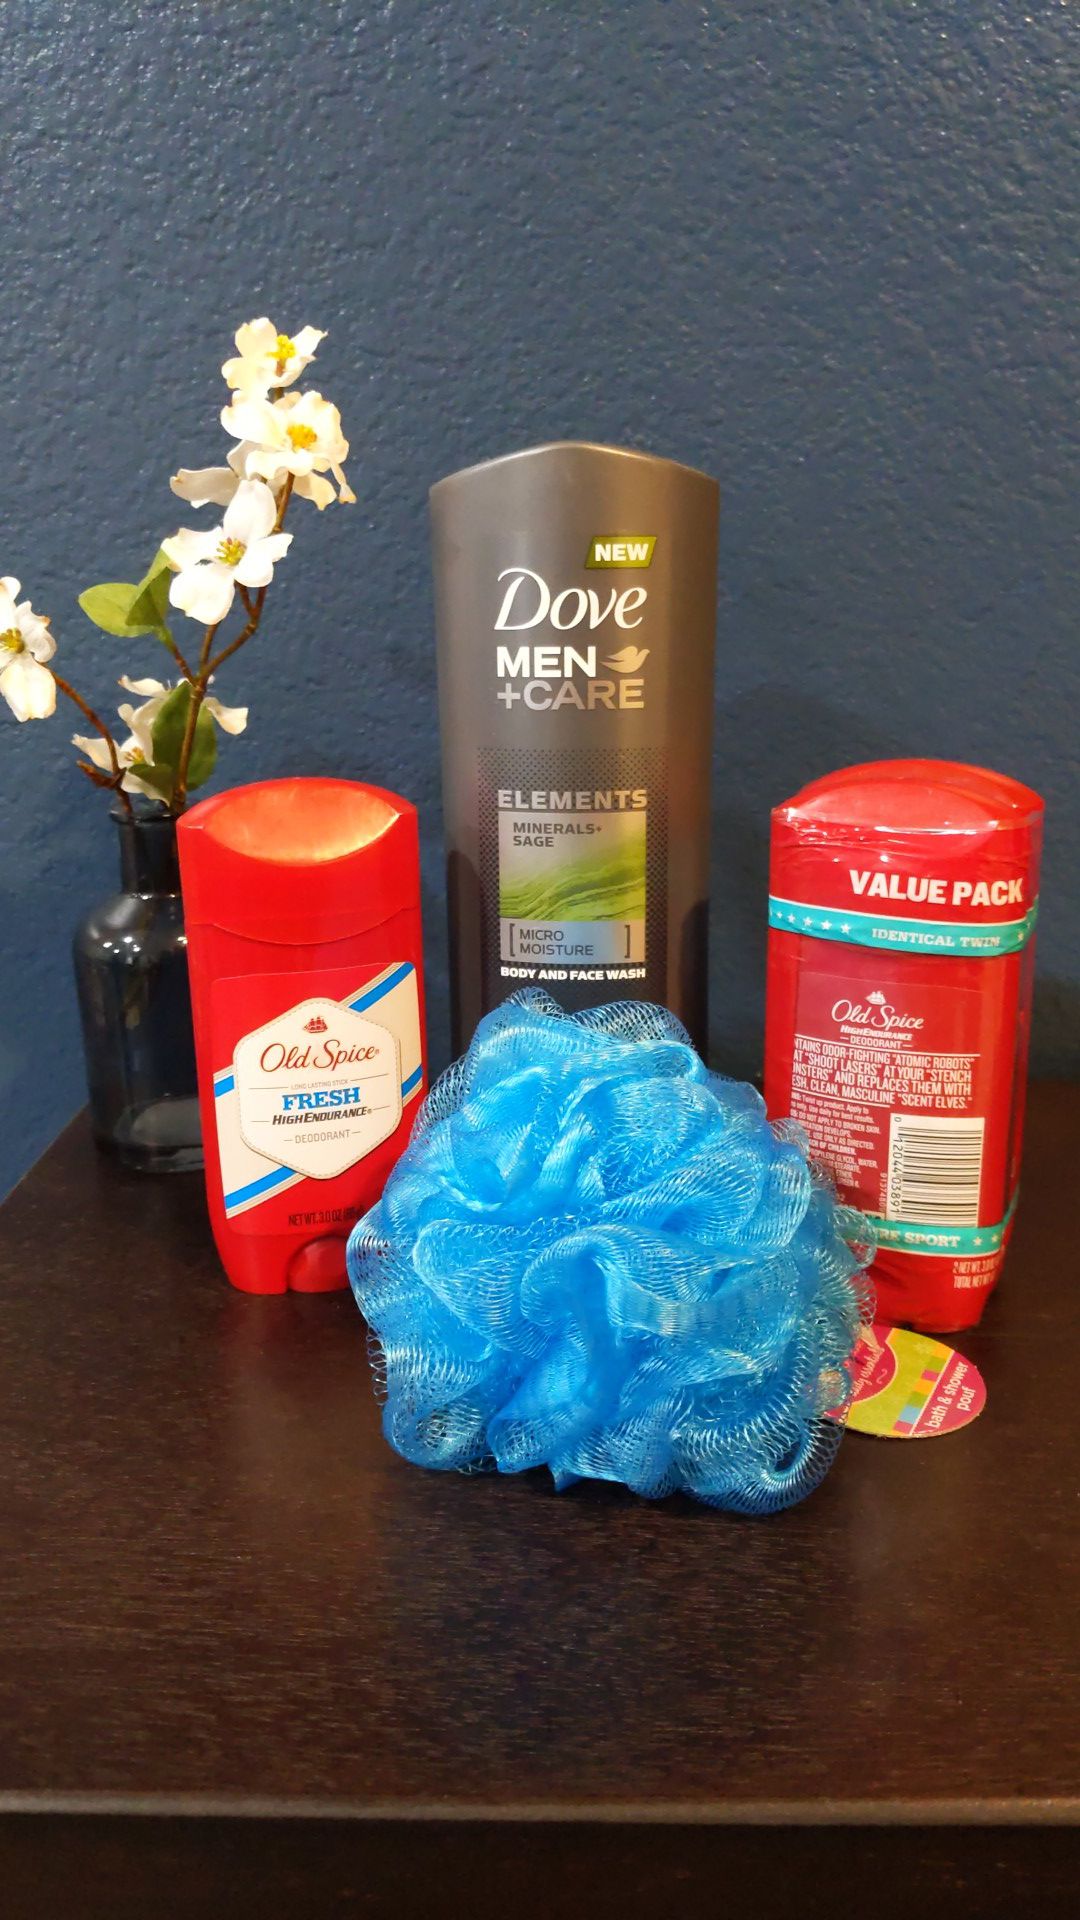 Bundle: 1 Dove men body and face wash, 2 Old Spice Deodorant ,1 Old Spice Deodorant and body sponge (blue)